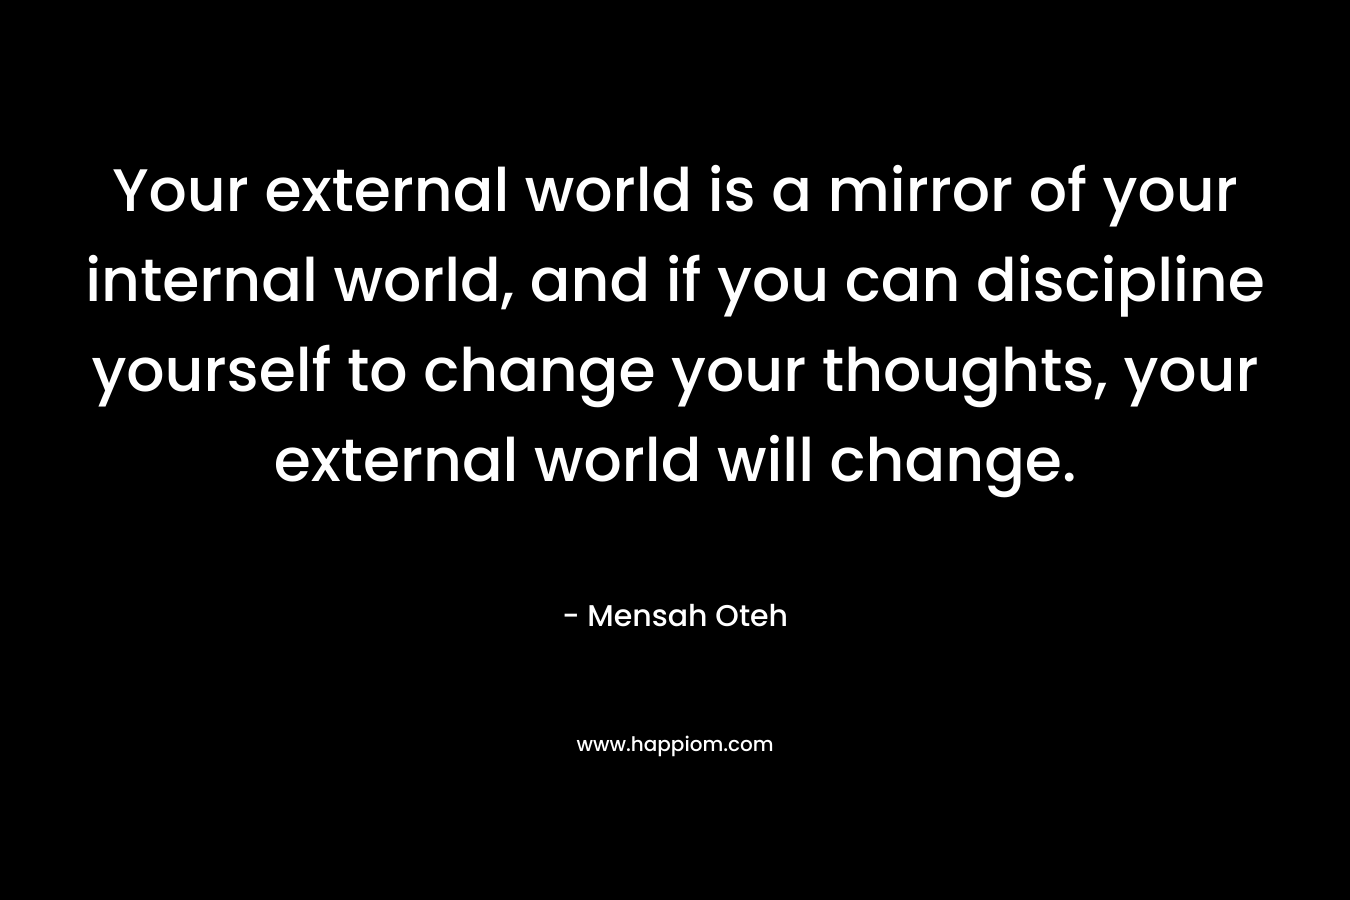 Your external world is a mirror of your internal world, and if you can discipline yourself to change your thoughts, your external world will change.